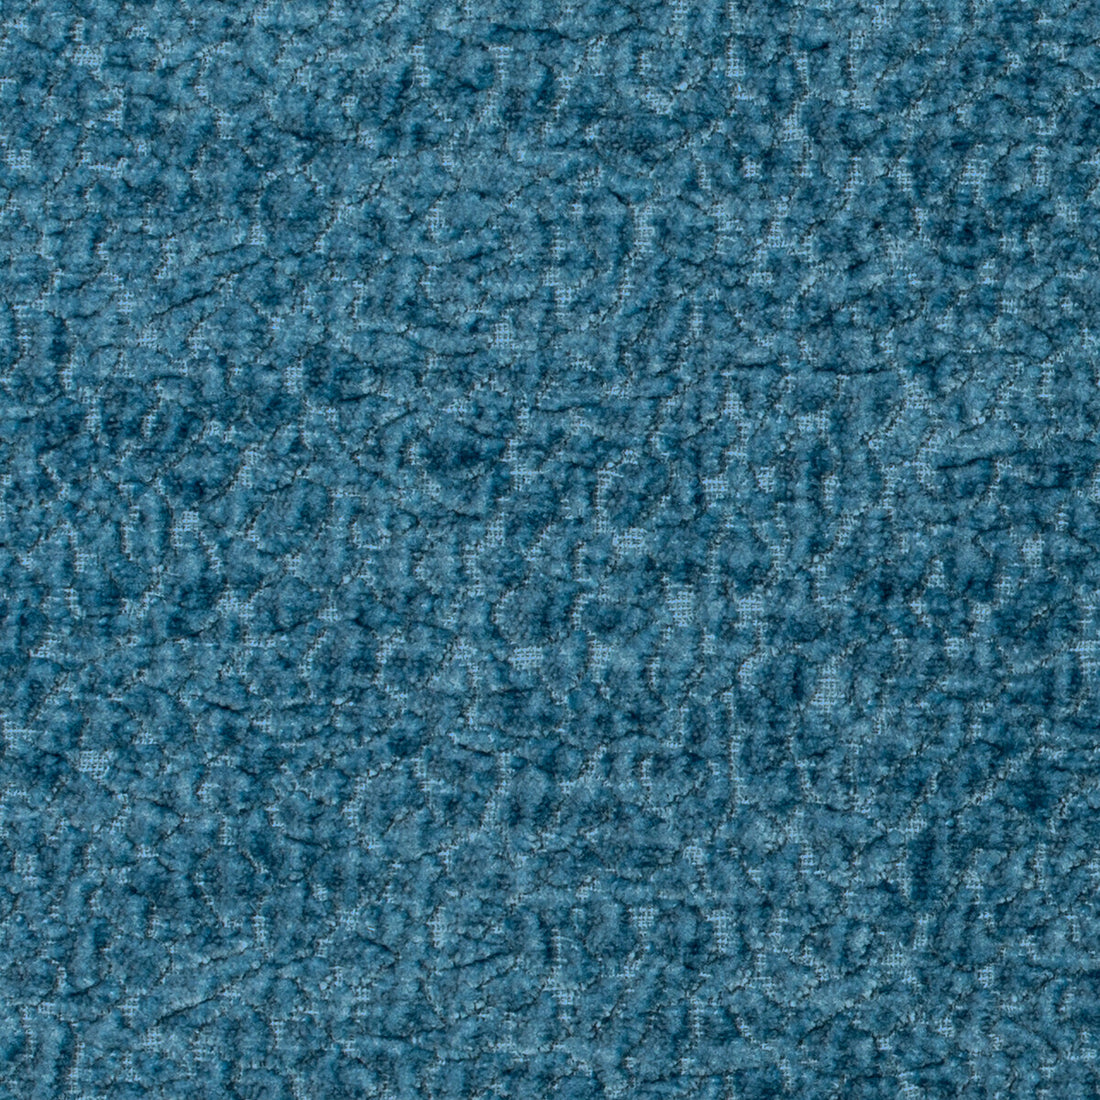 Barton Chenille fabric in sky color - pattern 36074.1115.0 - by Kravet Smart